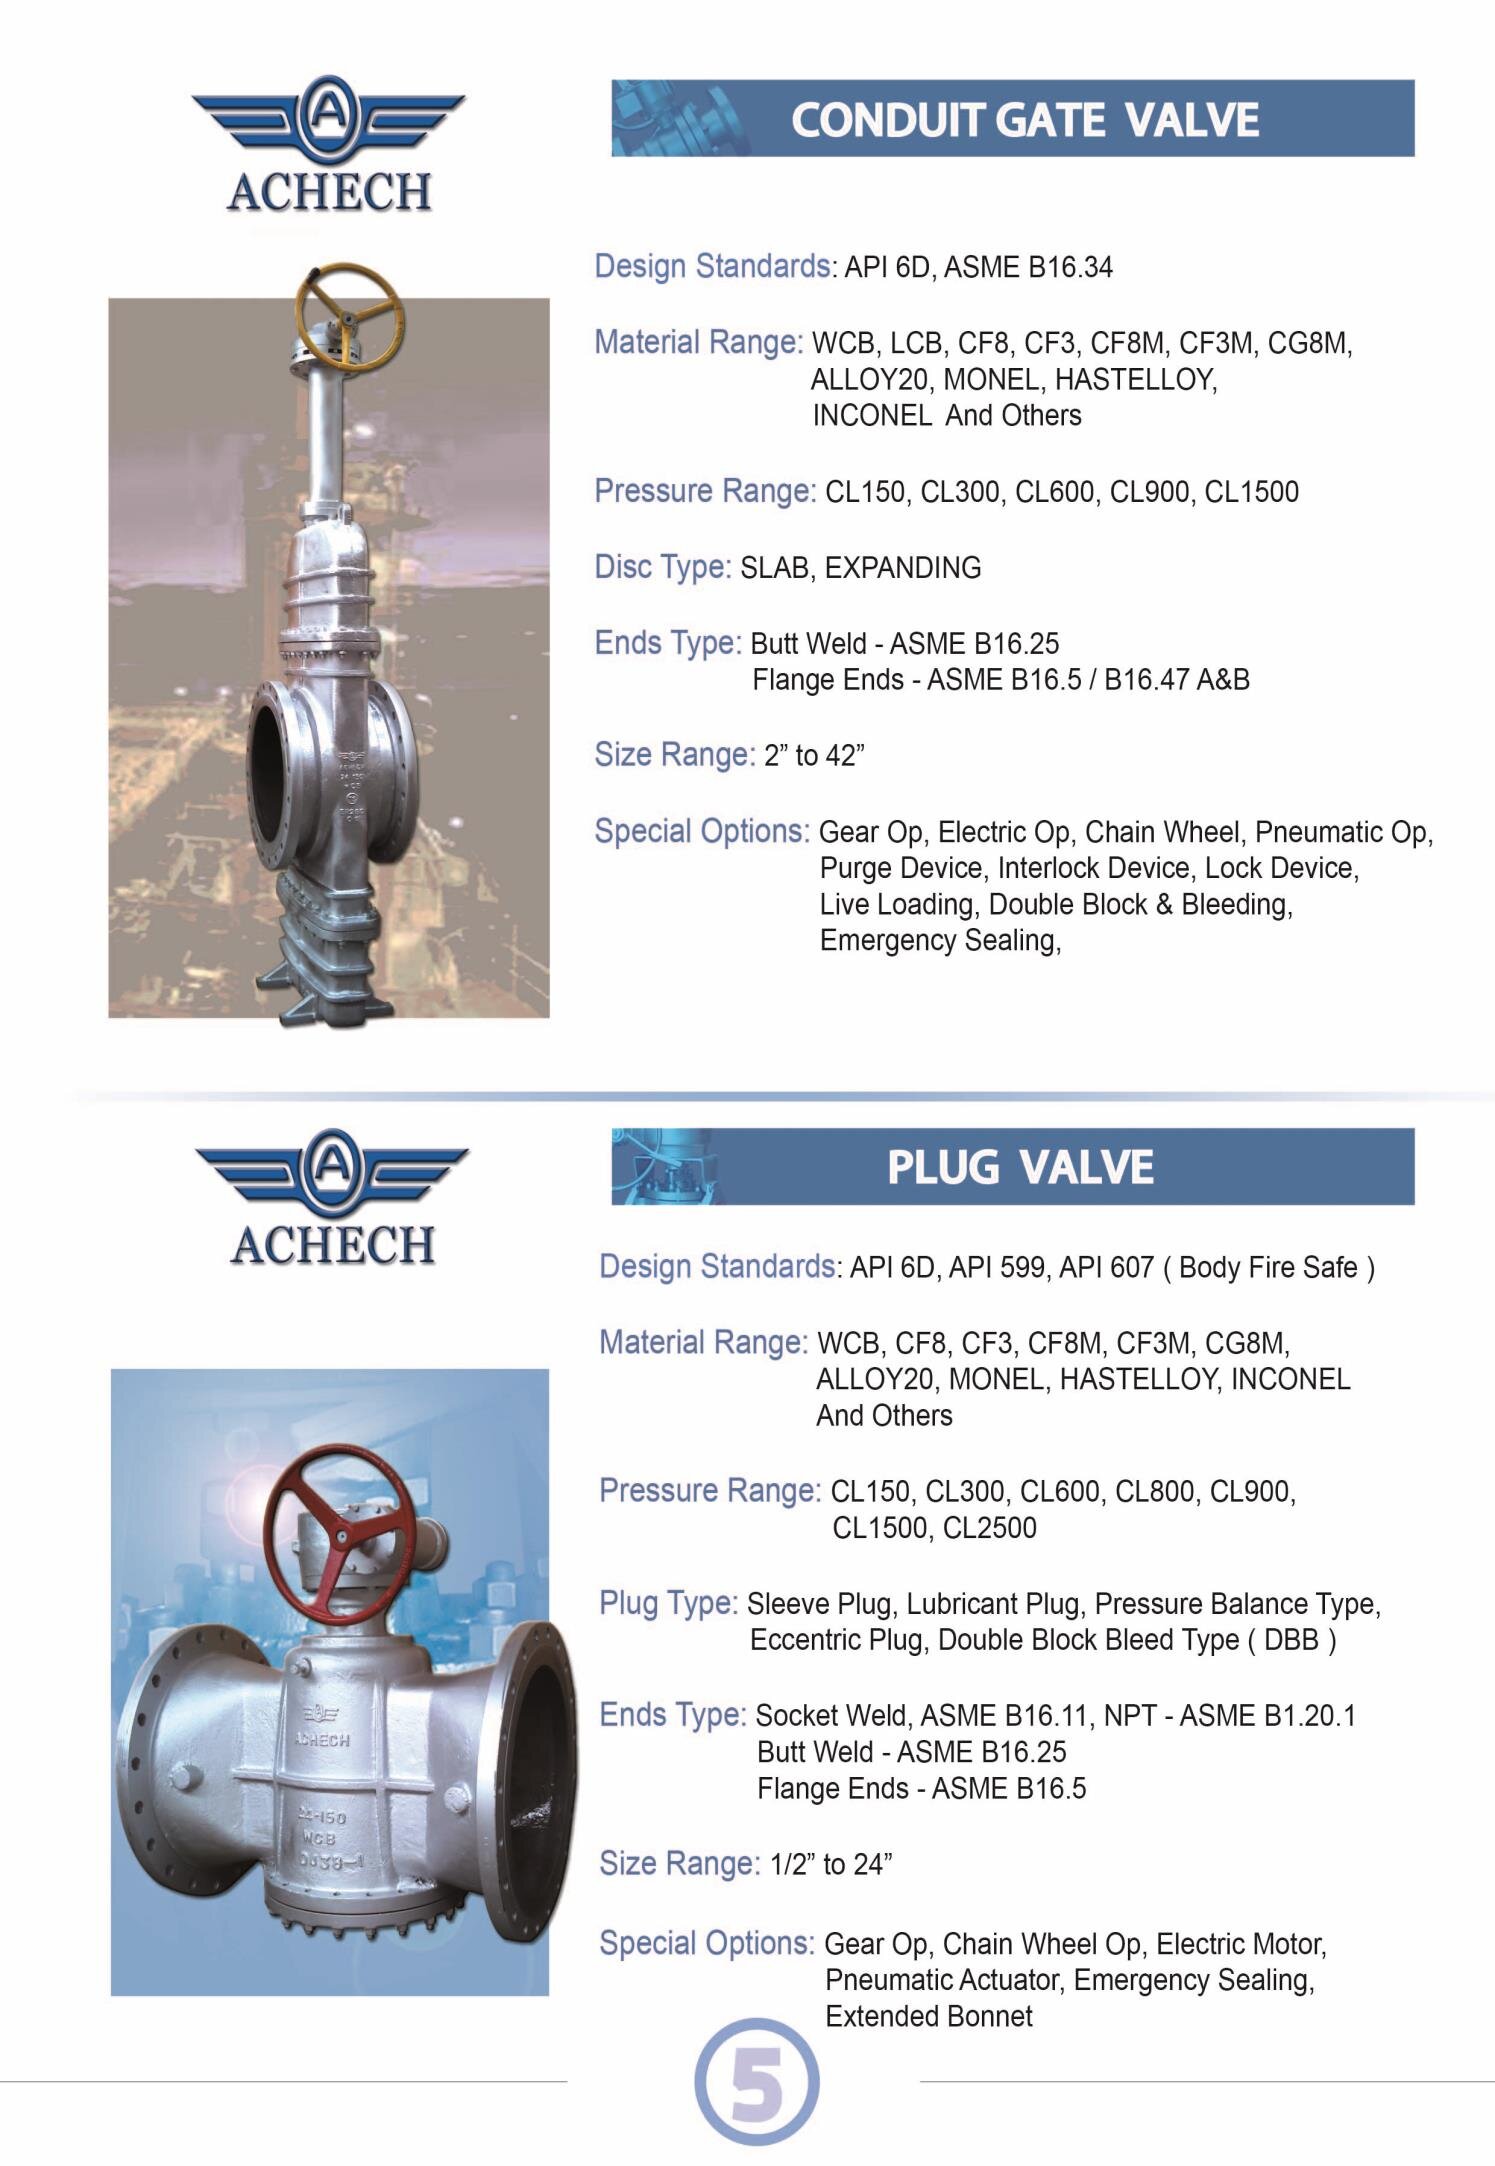 ACHECH PRODUCTS LIST_Page_06_Image_0001.jpg